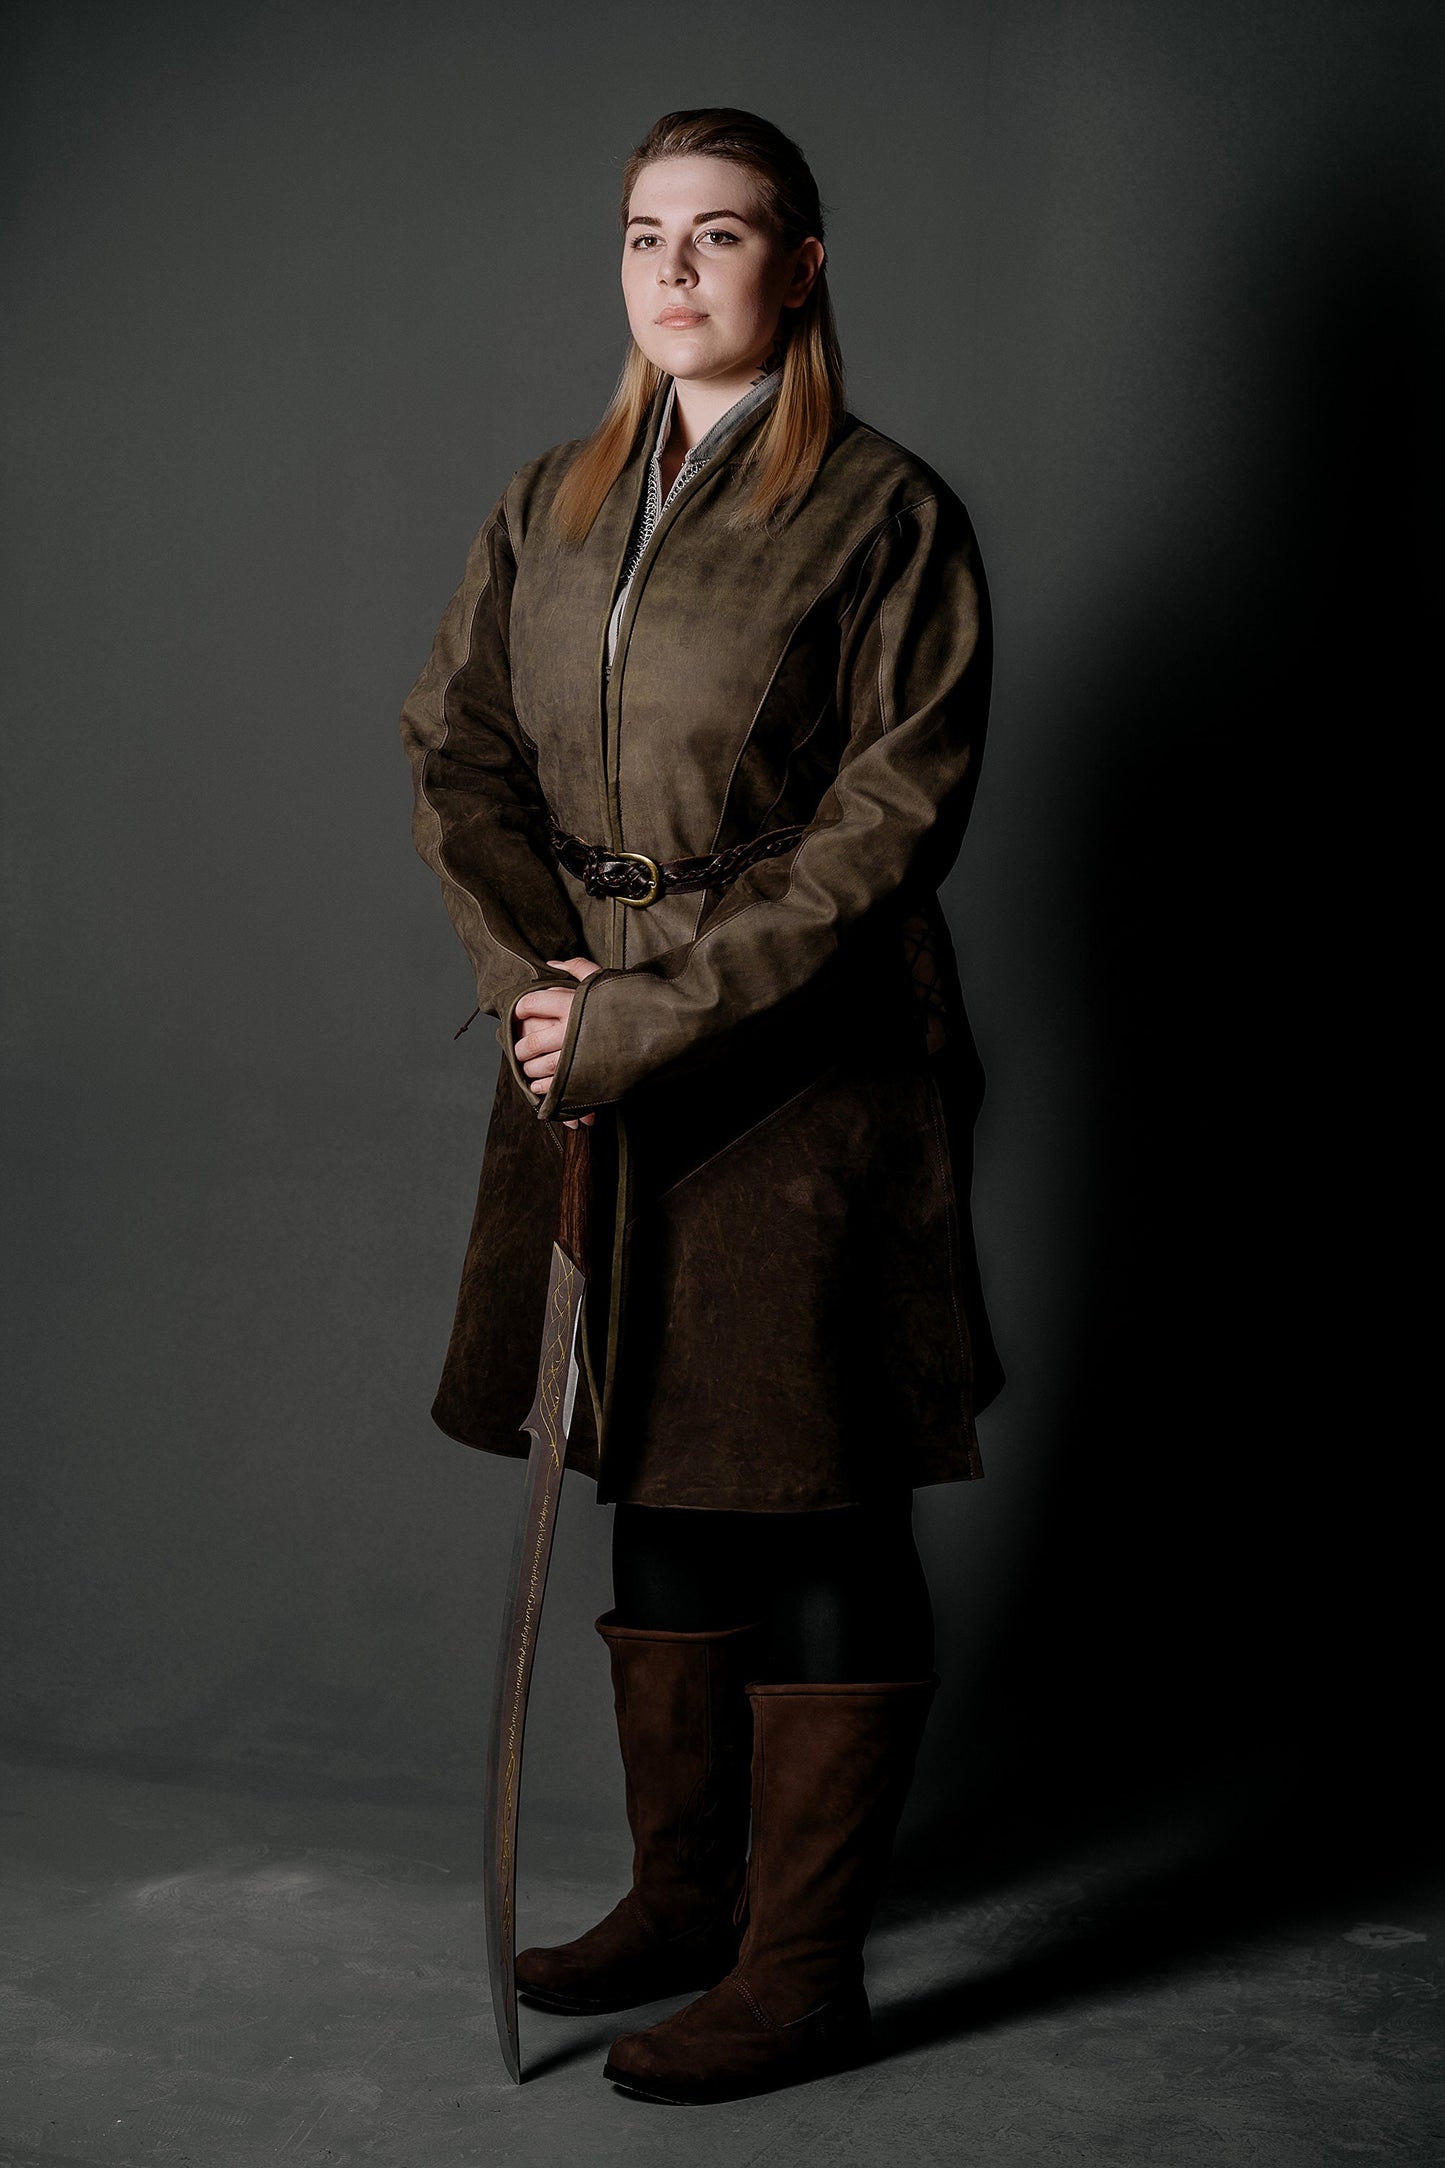 Legolas costume (Lord of the Rings)